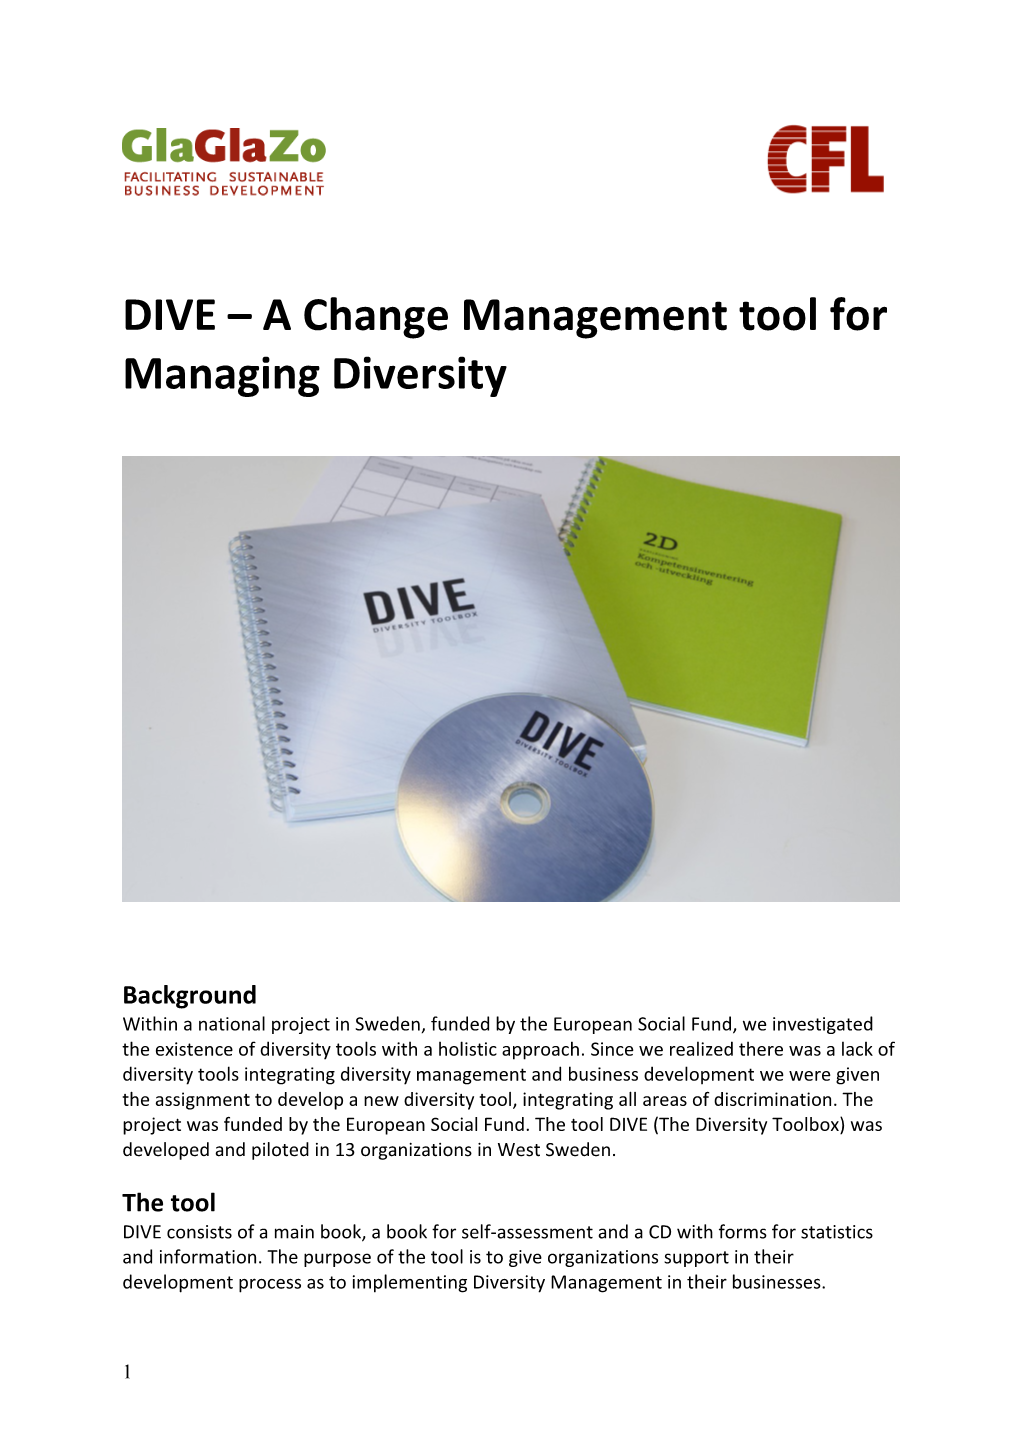 DIVE a Change Management Tool for Managing Diversity